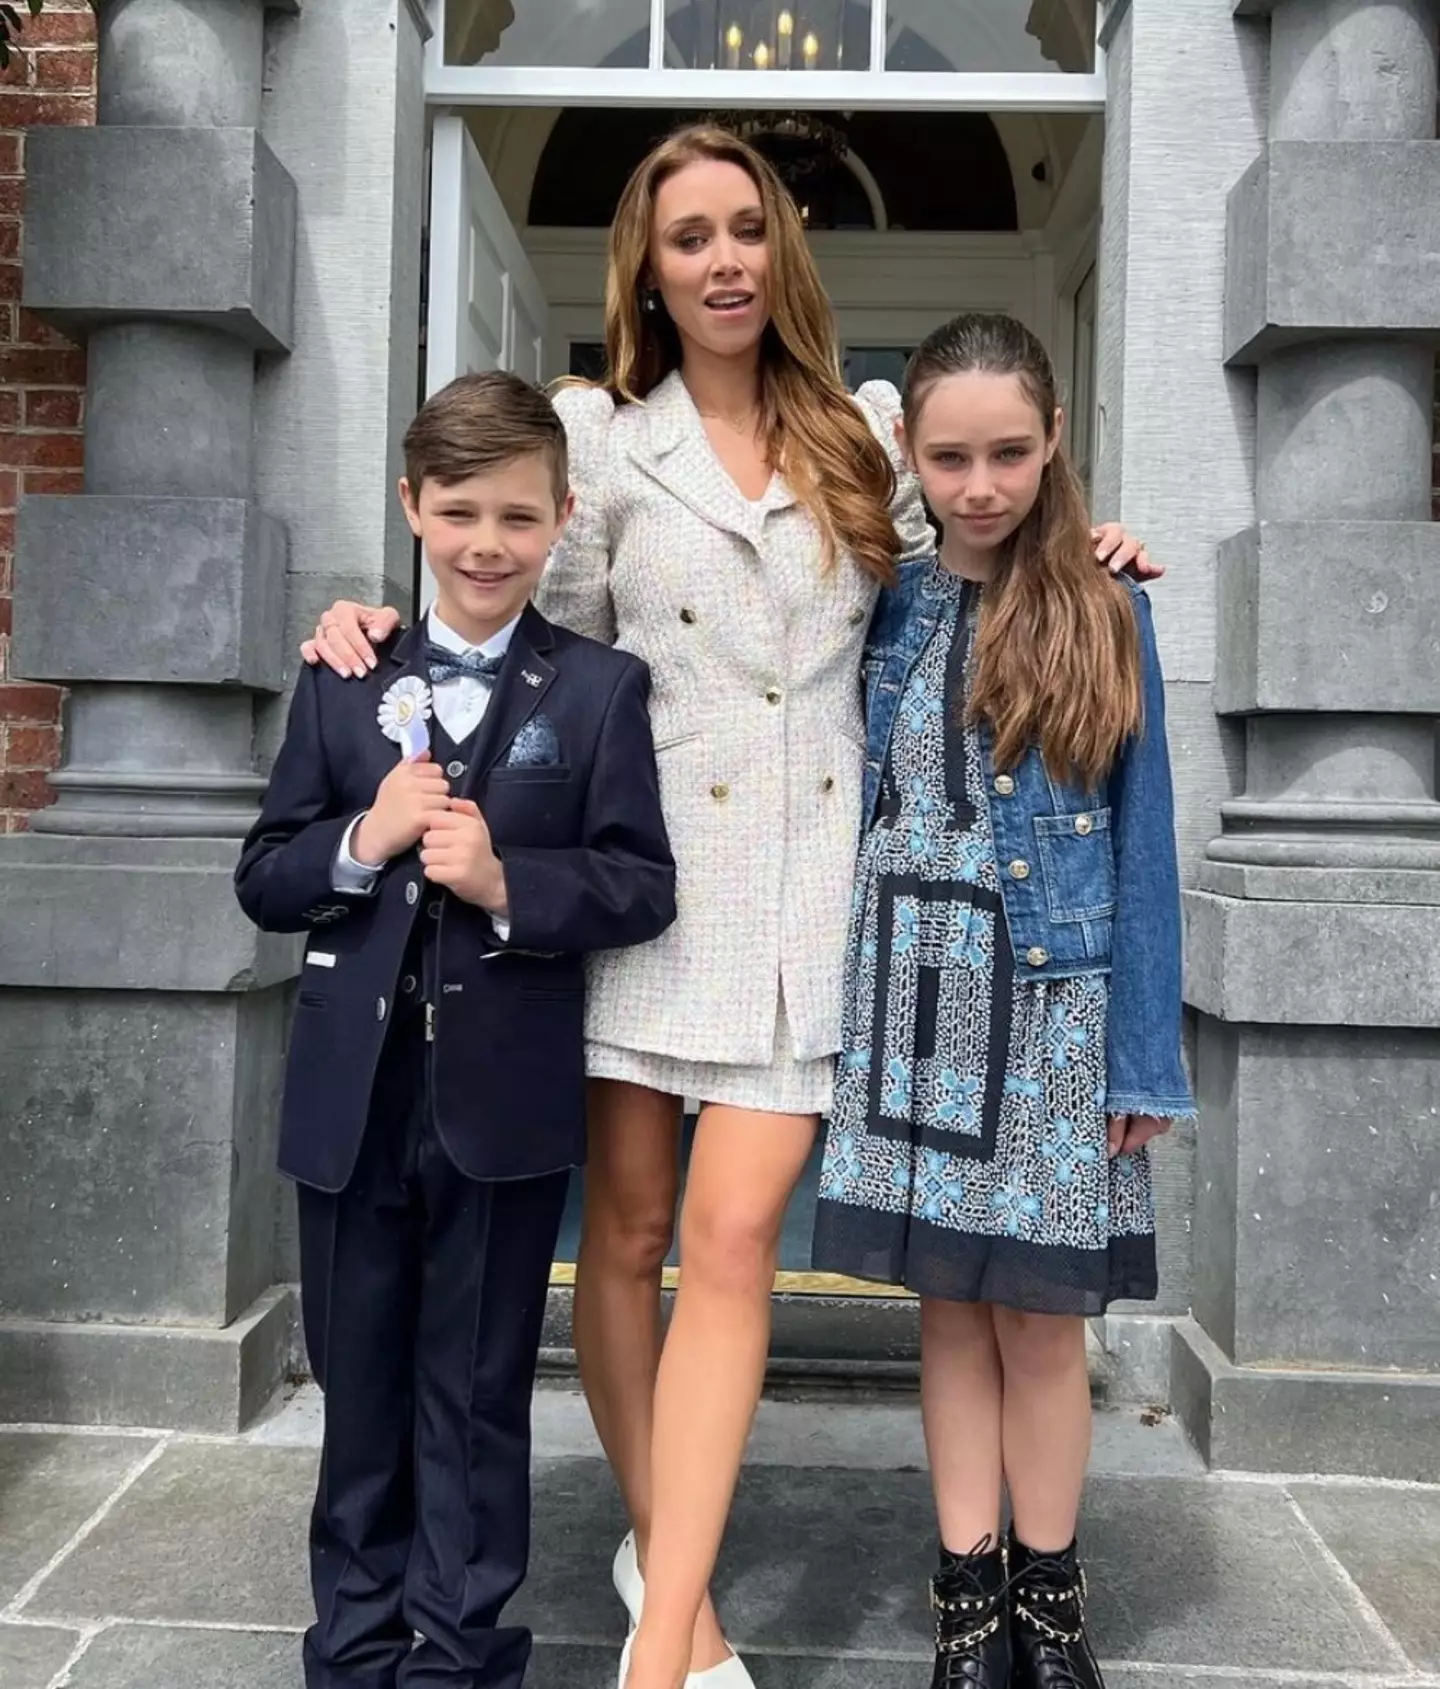 Healy and Foden share two children.